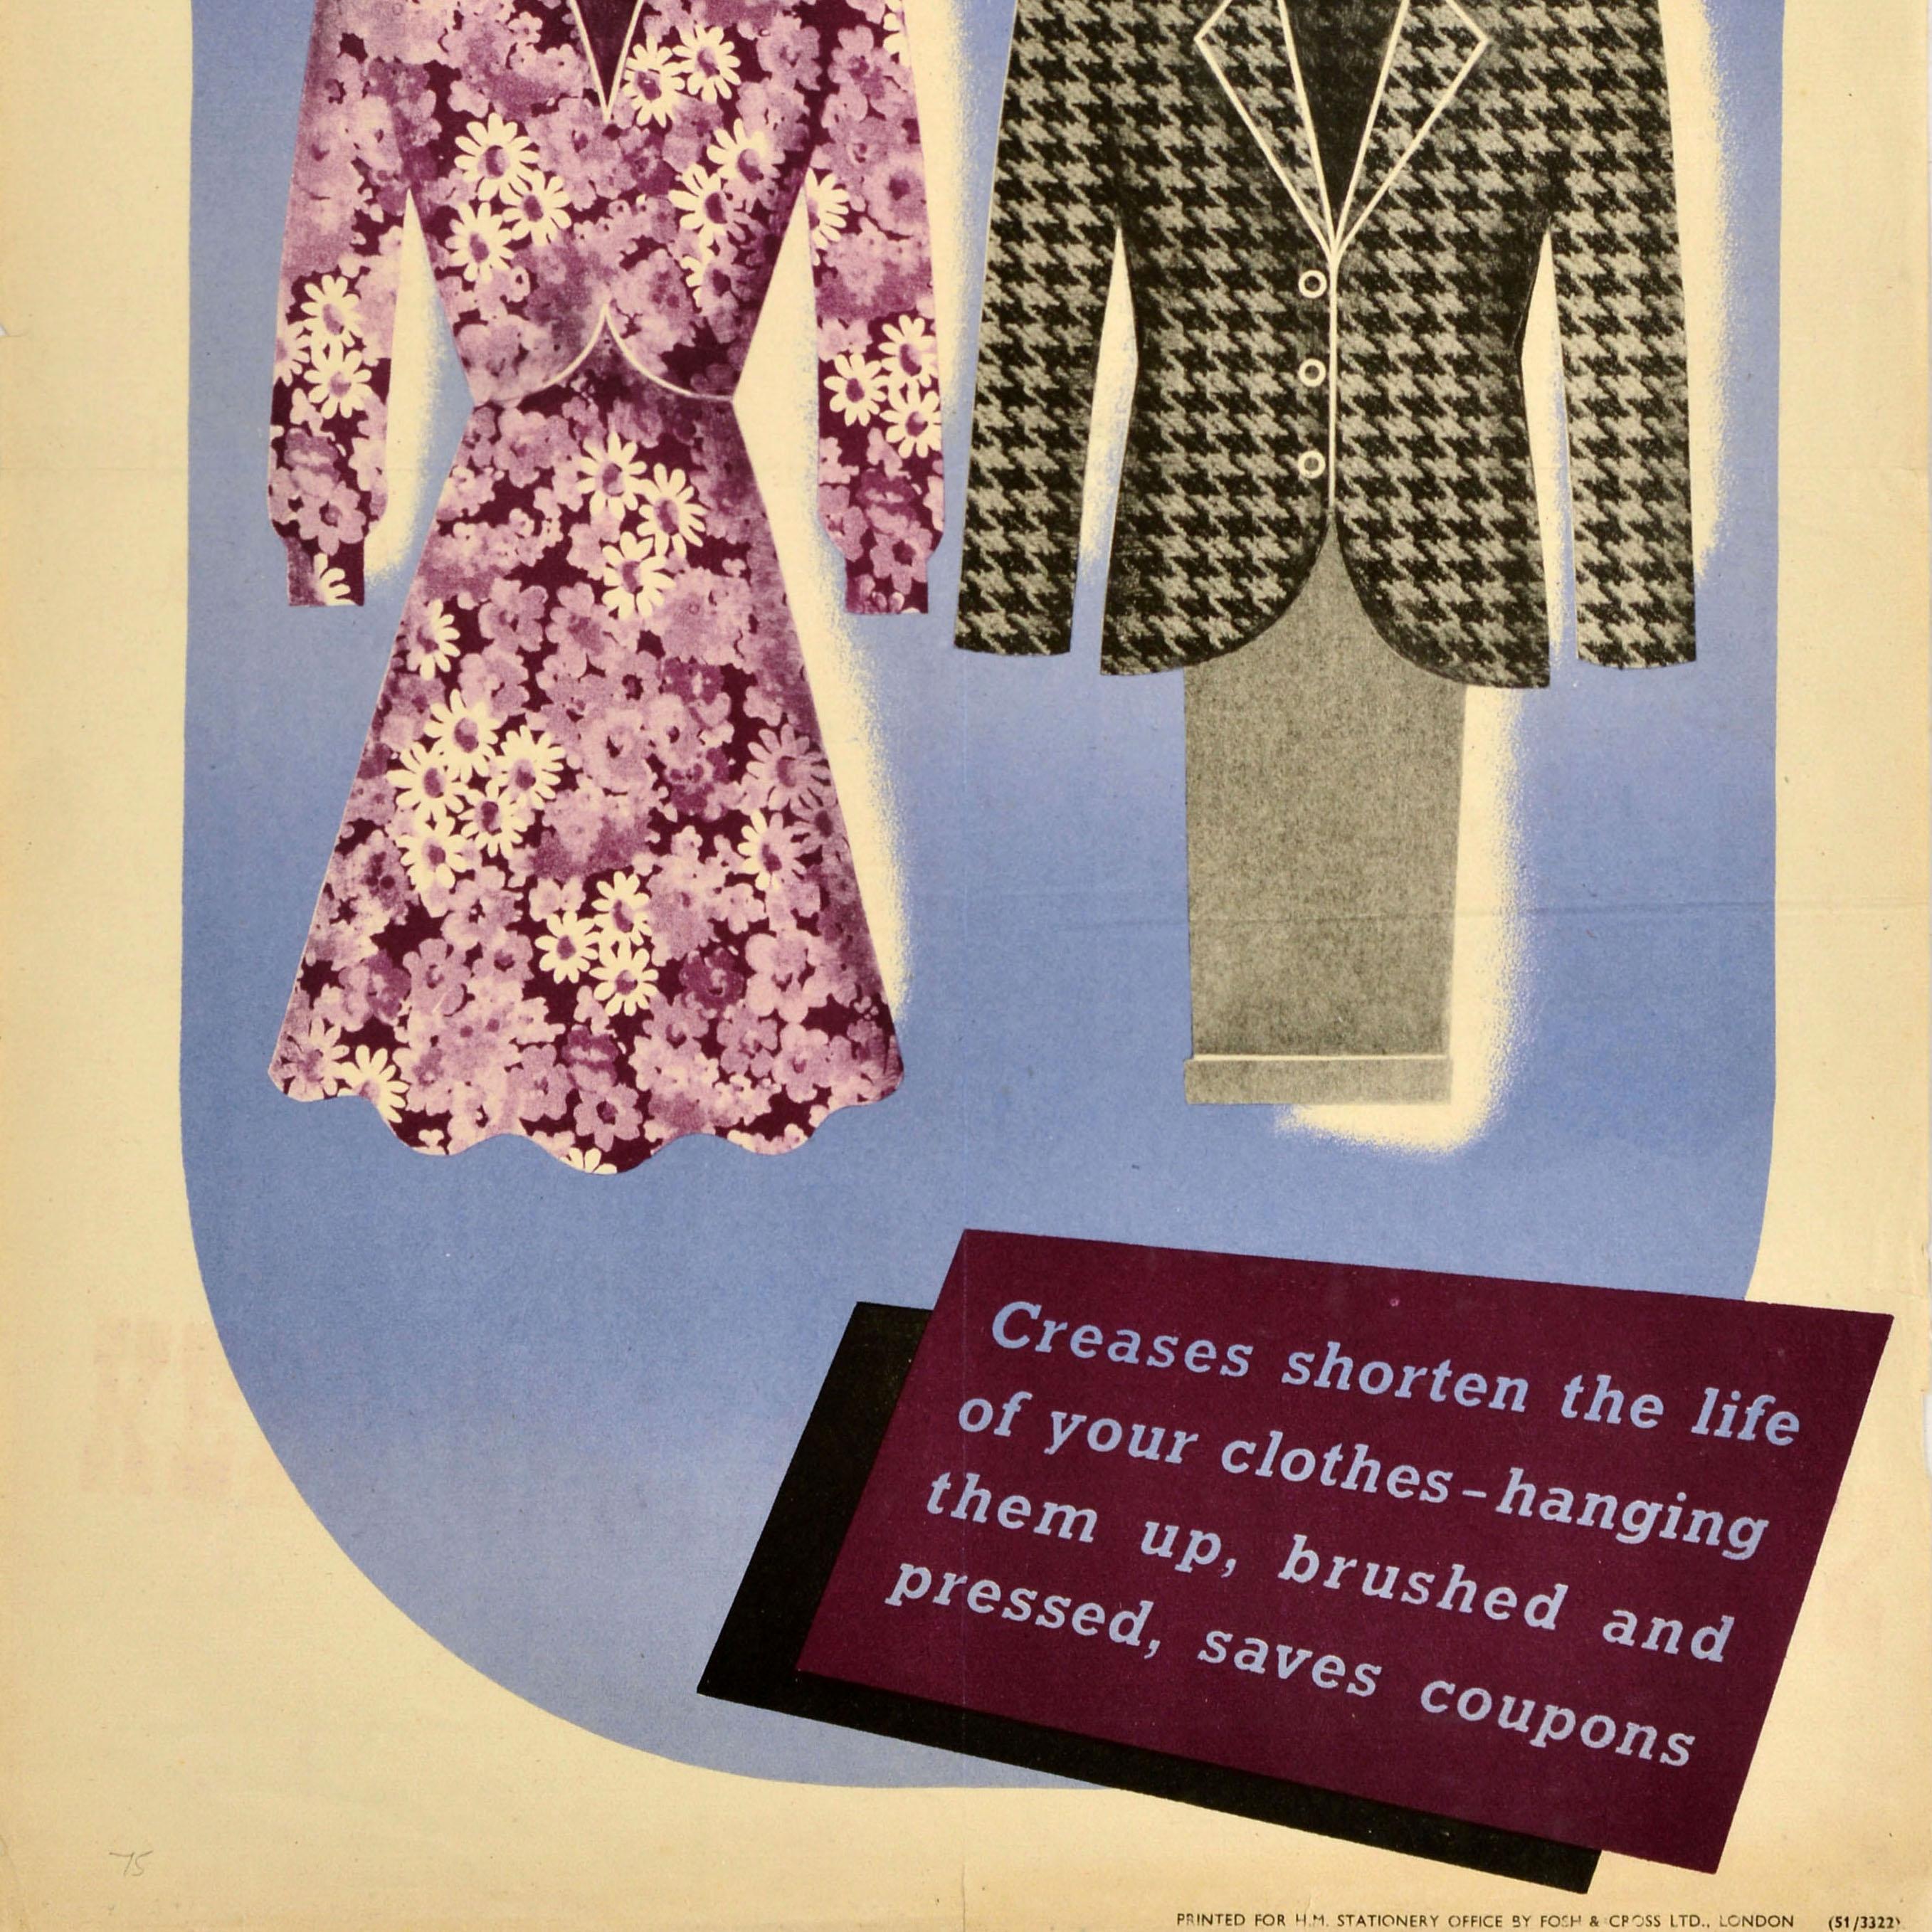 Original vintage World War Two home front poster - Keep Clothes On Hangers Creases shorten the life of your clothes hanging them up, brushed and pressed, saves coupons - featuring an image of a floral dress and a suit on clothes hangers, the make do